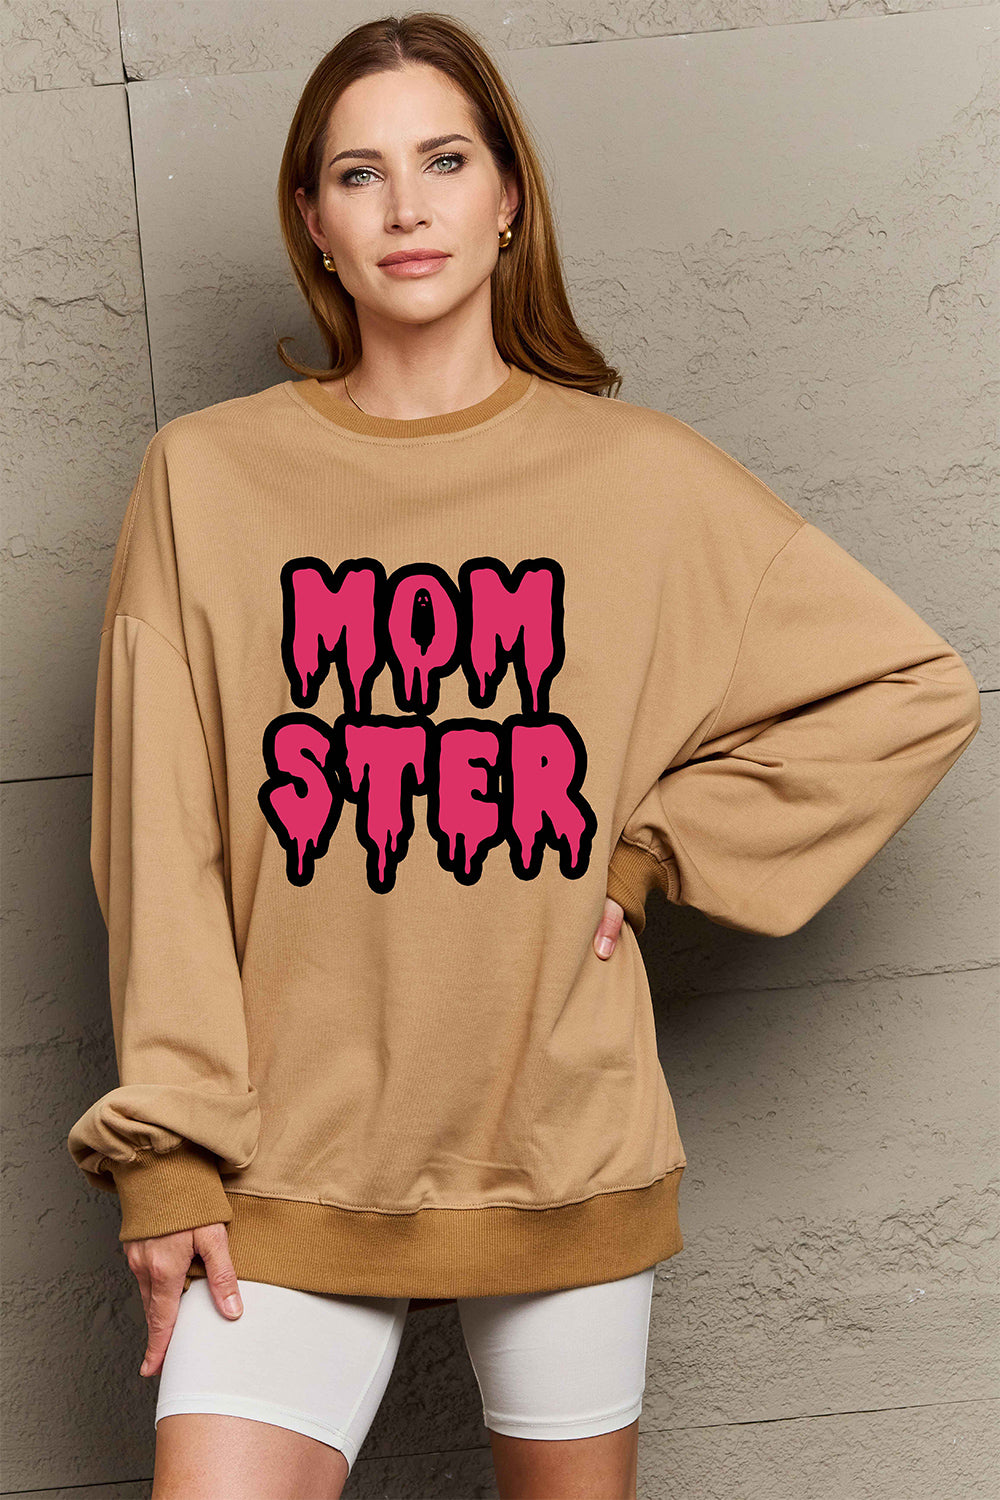 Simply Love Full Size MOM STER Graphic Sweatshirt